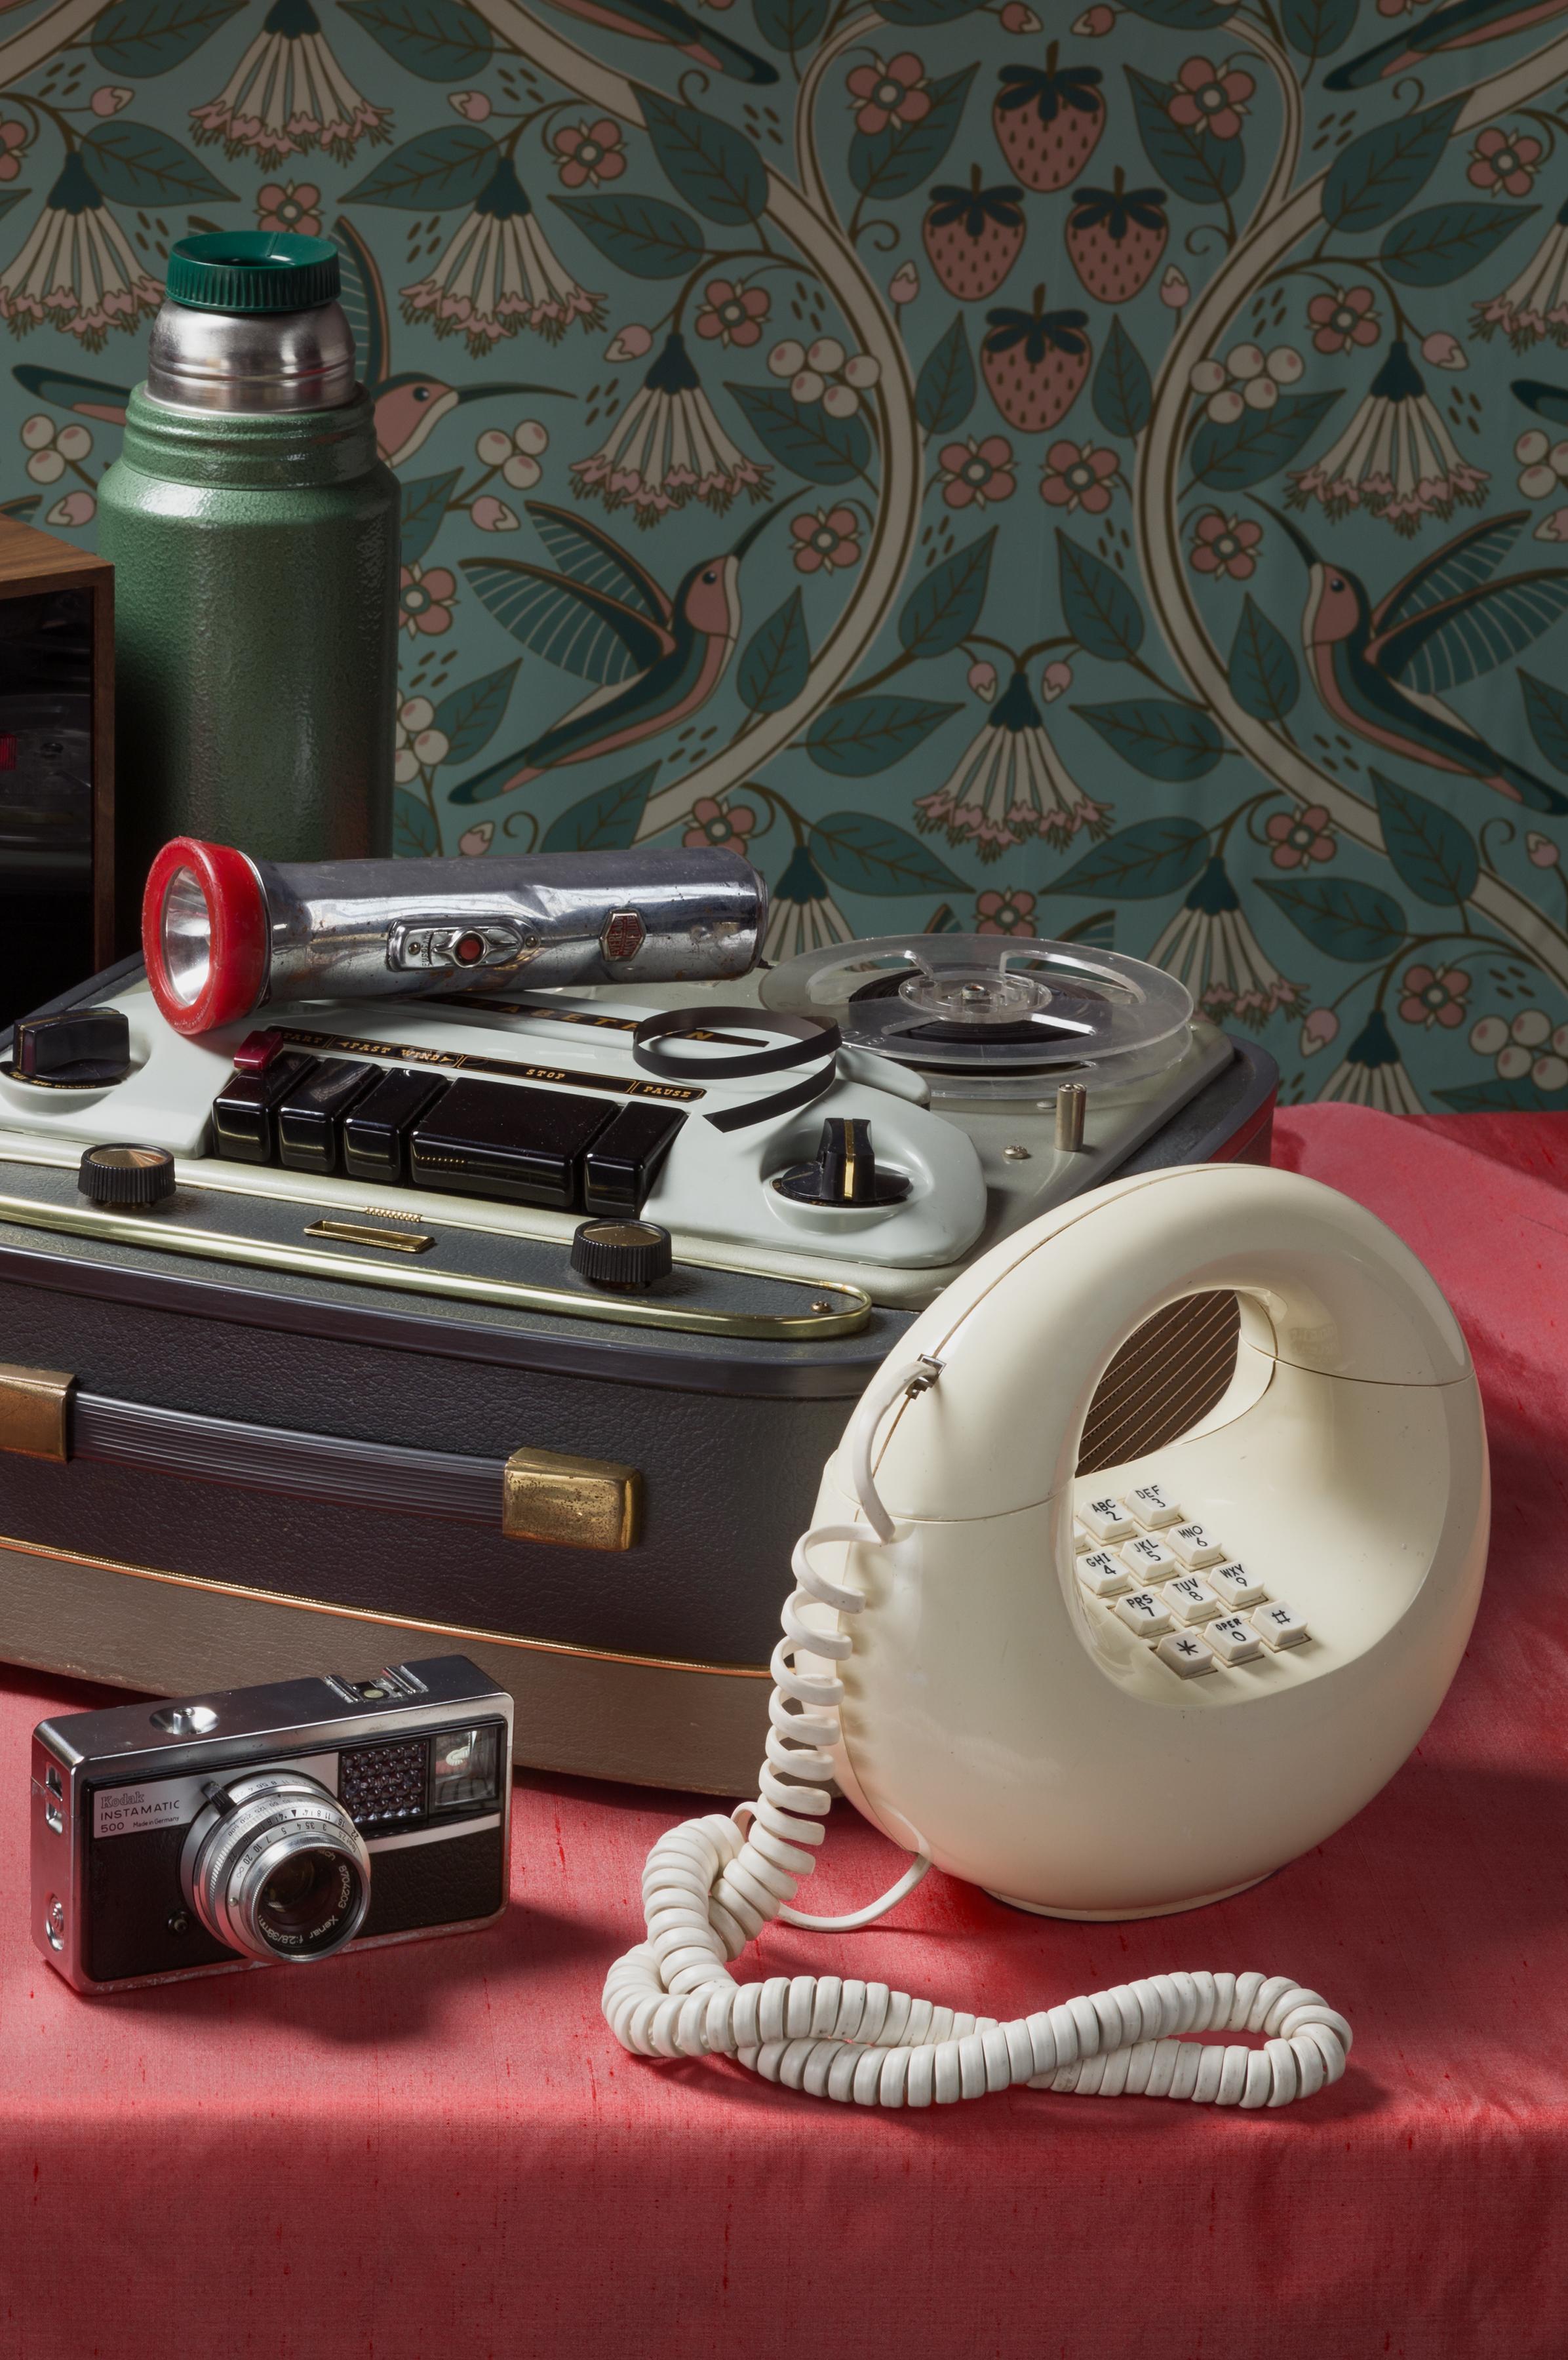 “Still Life with Answering Machine” appeared in Audubon Magazine, Winter 2021 issue. This bird watching still life continues the exploration of vintage tech begun in my “Tech Vanitas” series. Surrounded by rich silks and patterned wallpapers,